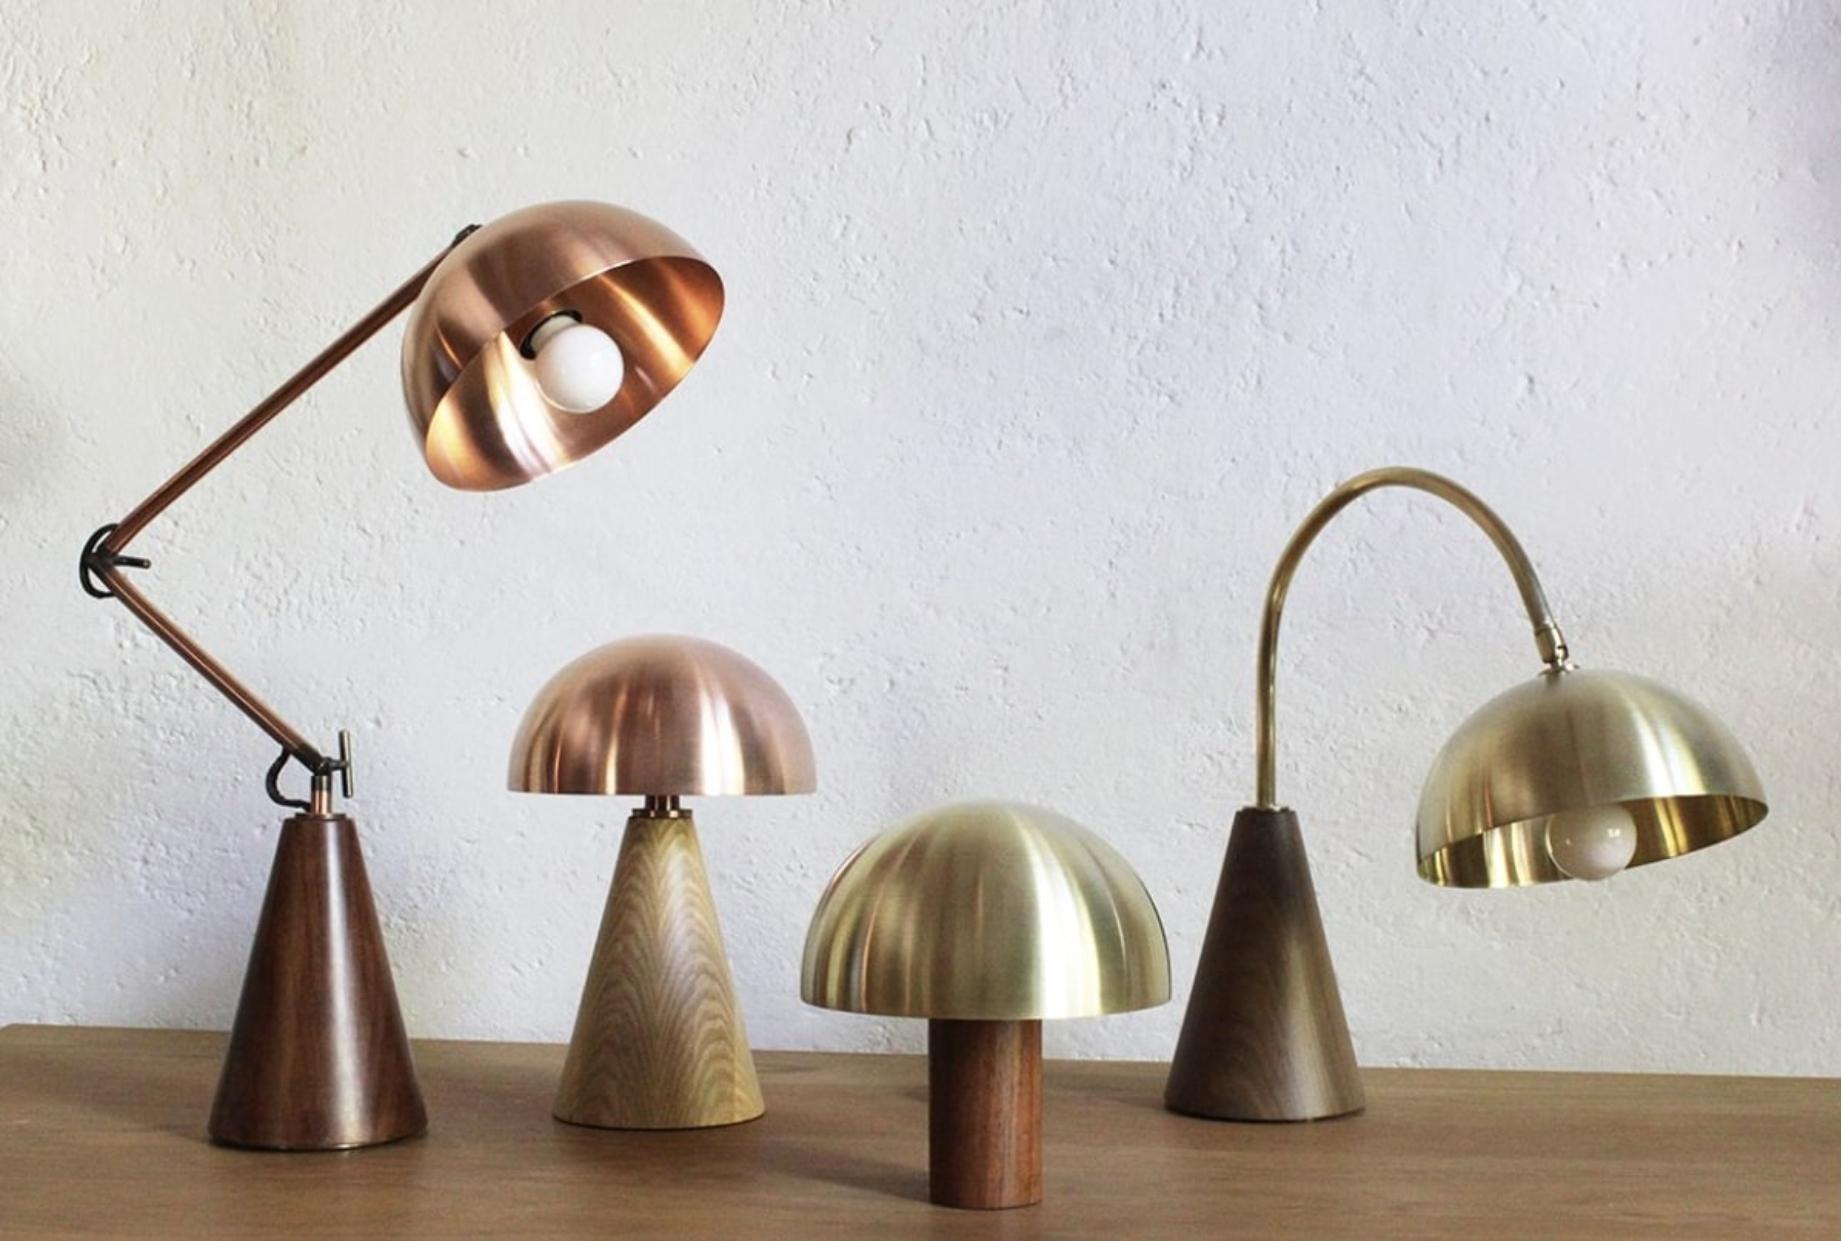 Copper Paraguas Table Lamp by Maria Beckmann, Represented by Tuleste Factory